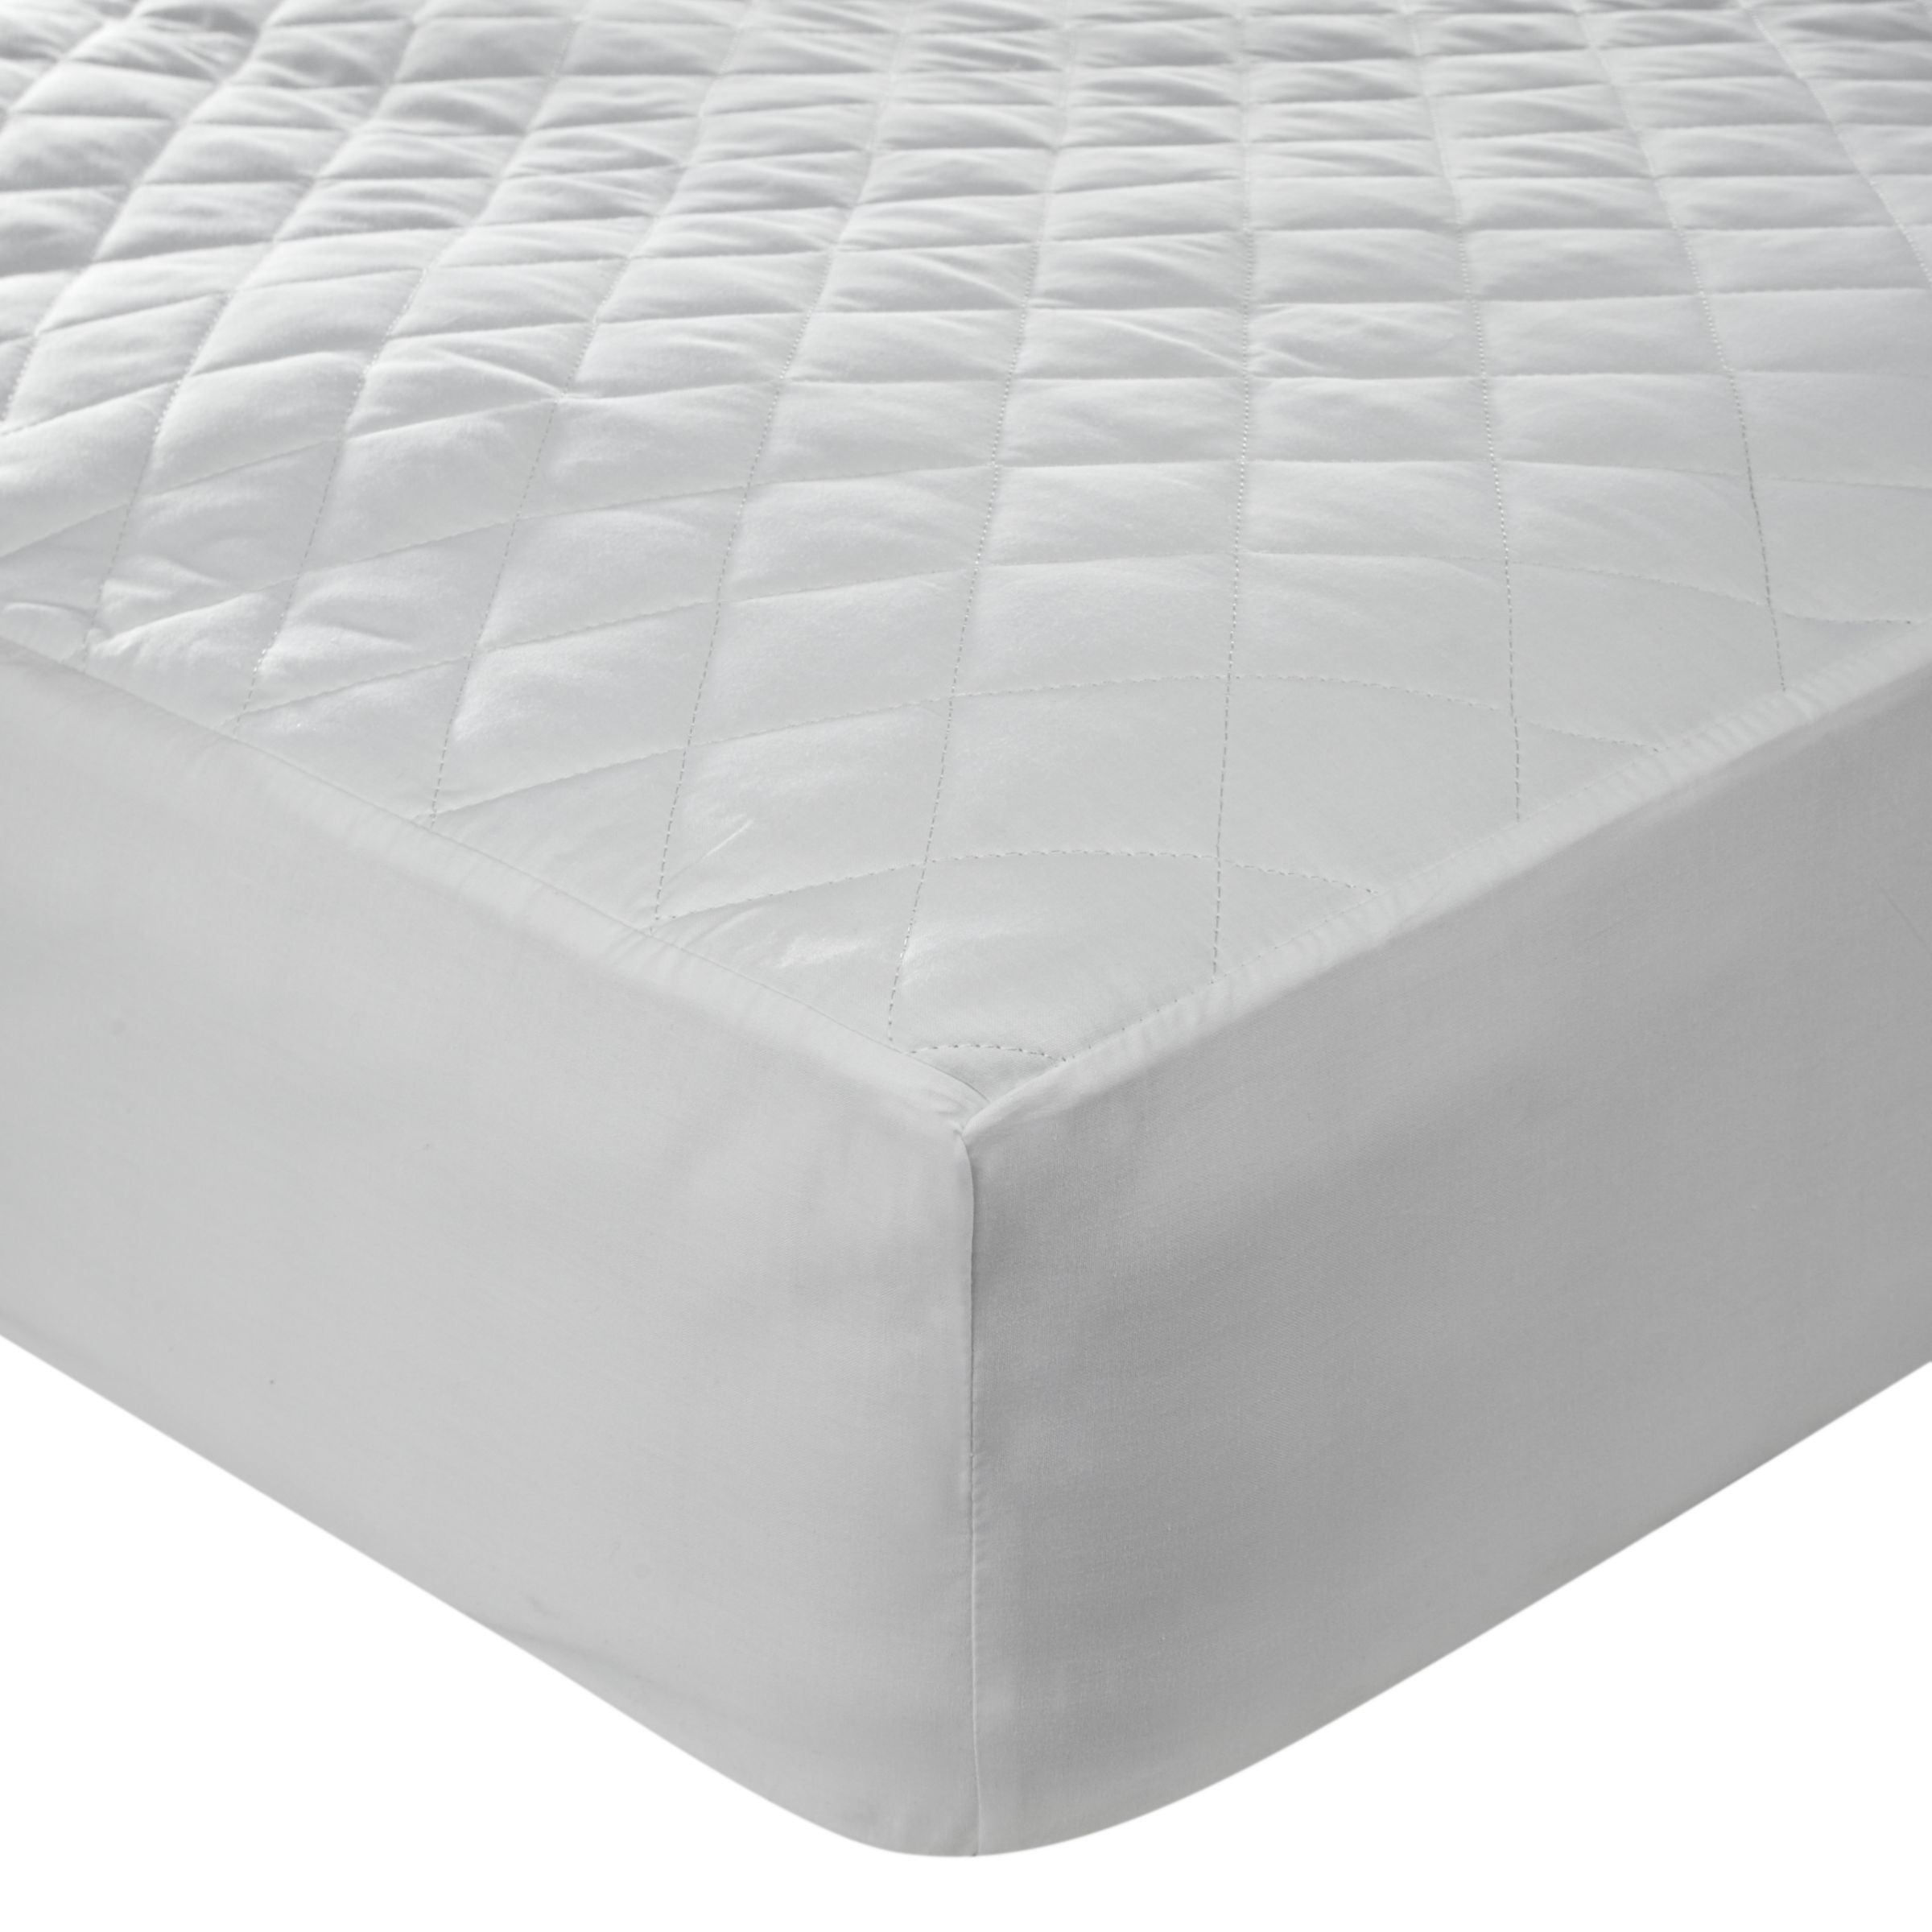 Polycotton Quilted Mattress Protector, Kingsize